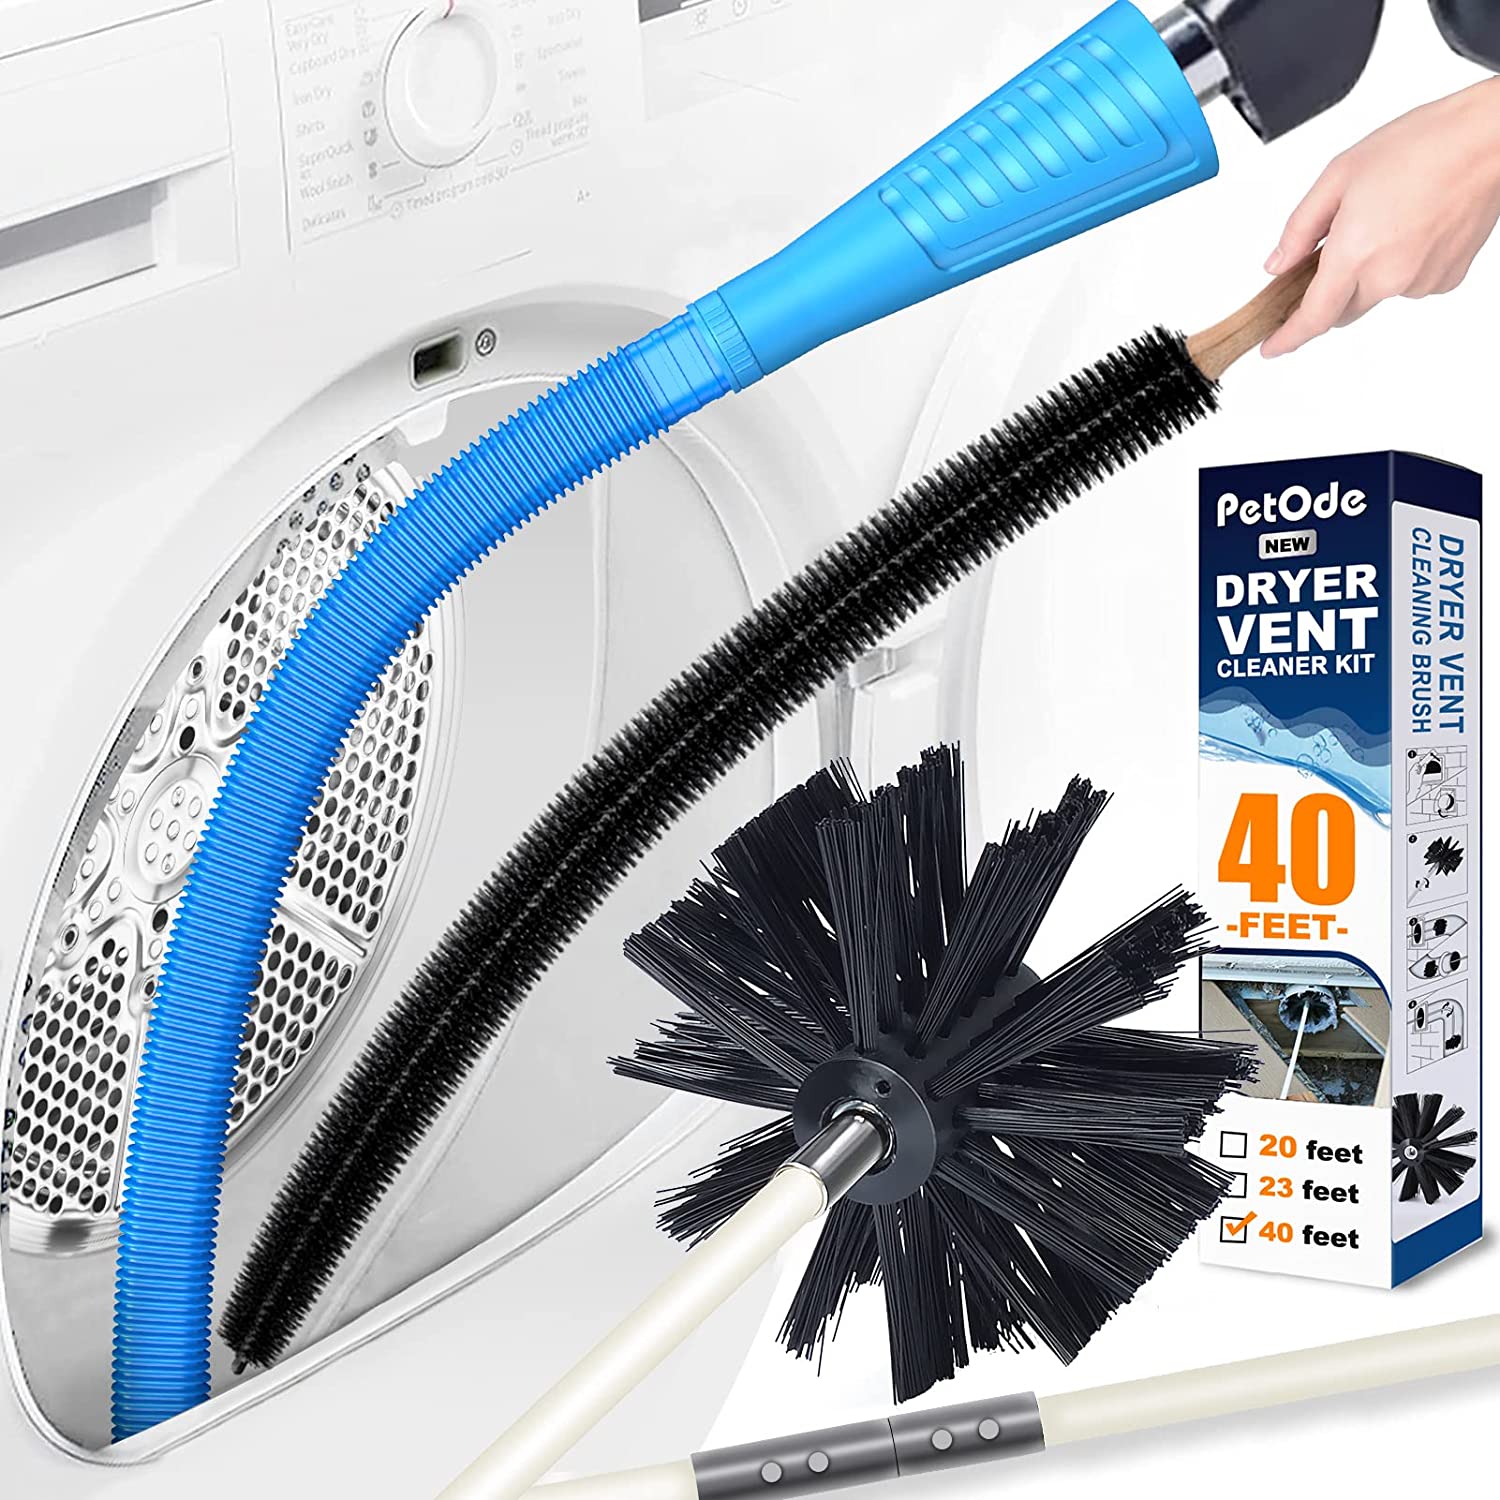 https://storables.com/wp-content/uploads/2023/08/11-incredible-dryer-cleaning-kit-for-2023-1692241876.jpg